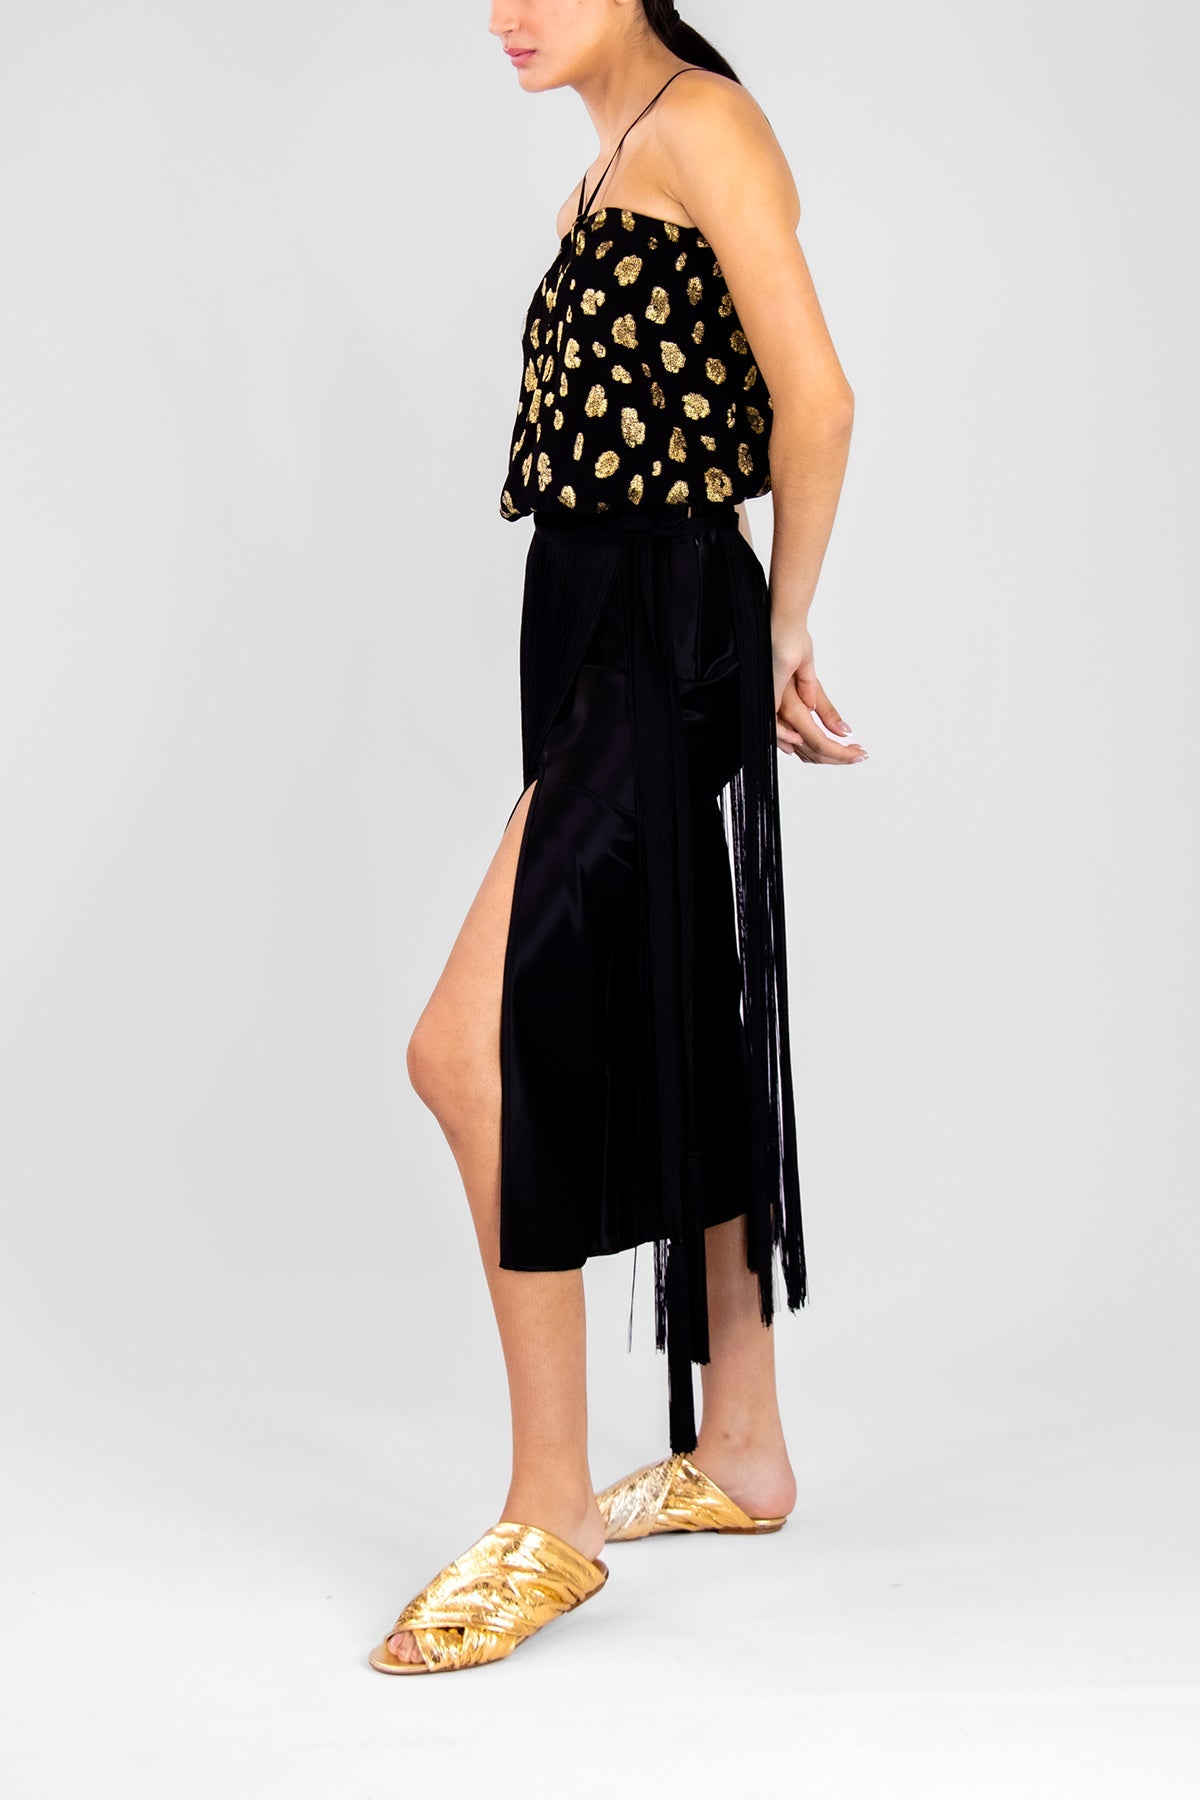 "A Sky of Stars" Georgette Fill Coup' Top in Black - shop-olivia.com